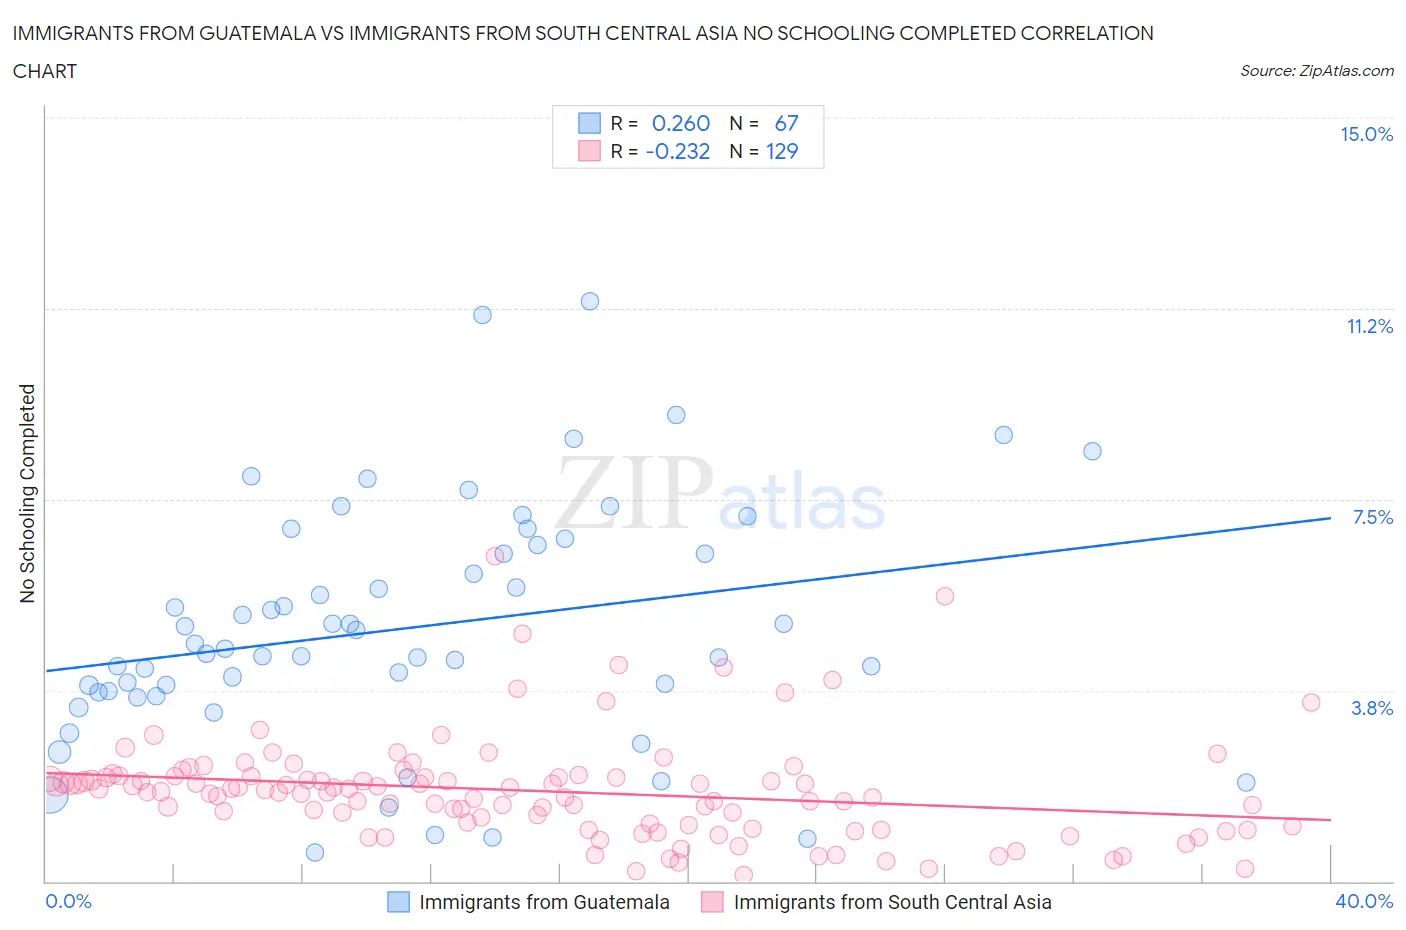 Immigrants from Guatemala vs Immigrants from South Central Asia No Schooling Completed